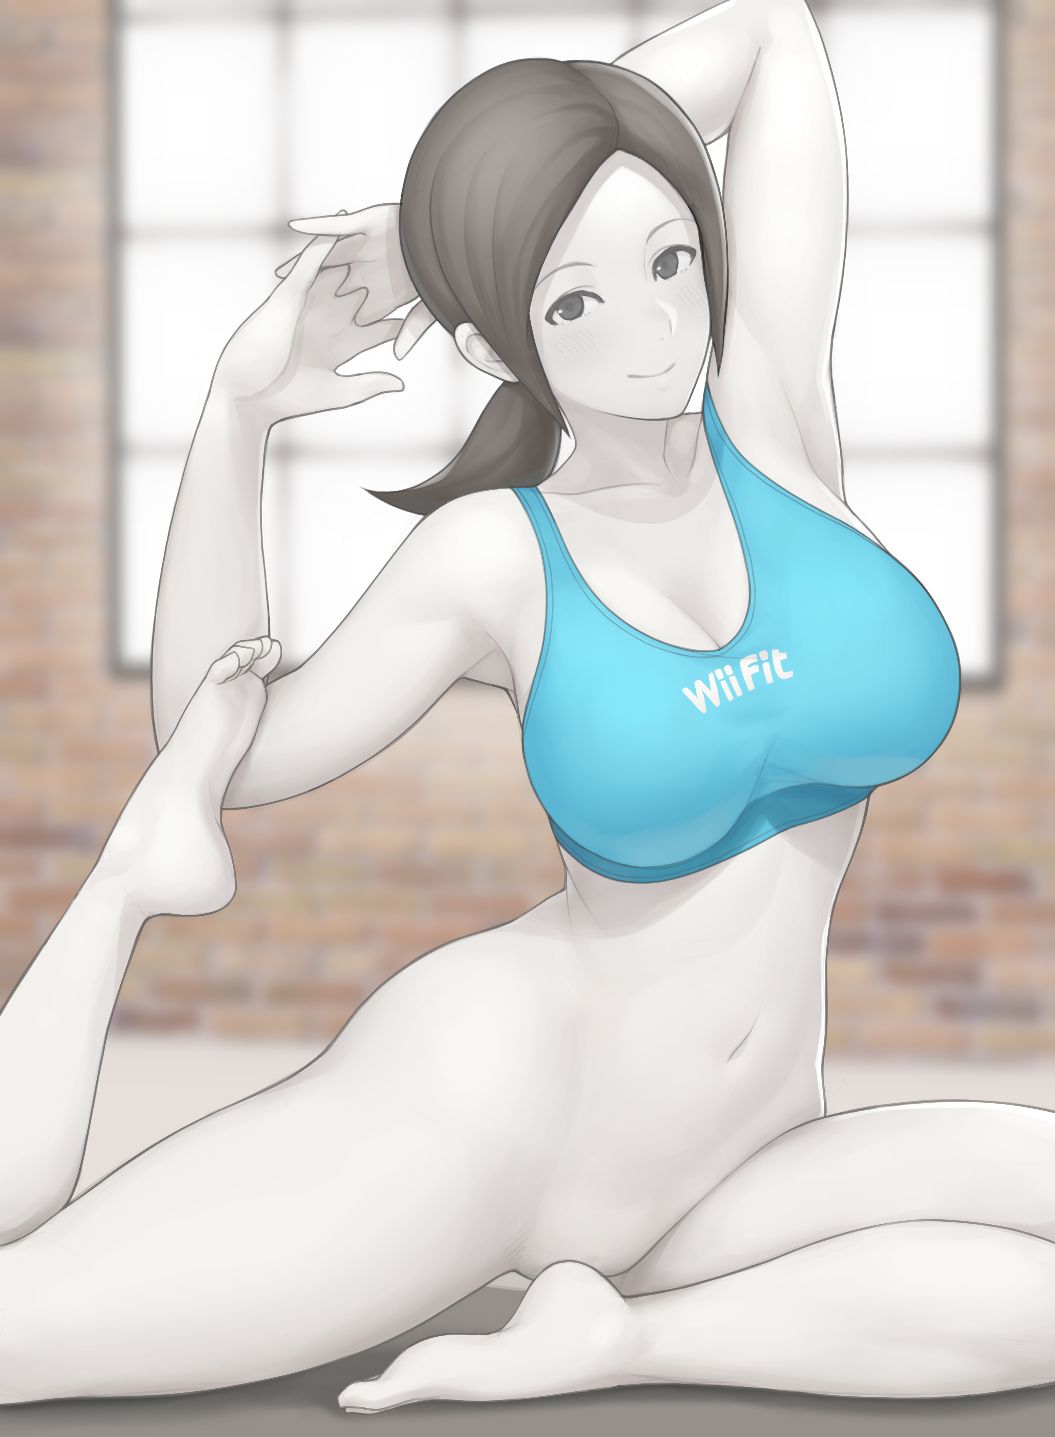 alluring bottomless bottomless_female excersize looking_at_viewer naked_from_the_waist_down sports_bra stretching wii_fit wii_fit_trainer